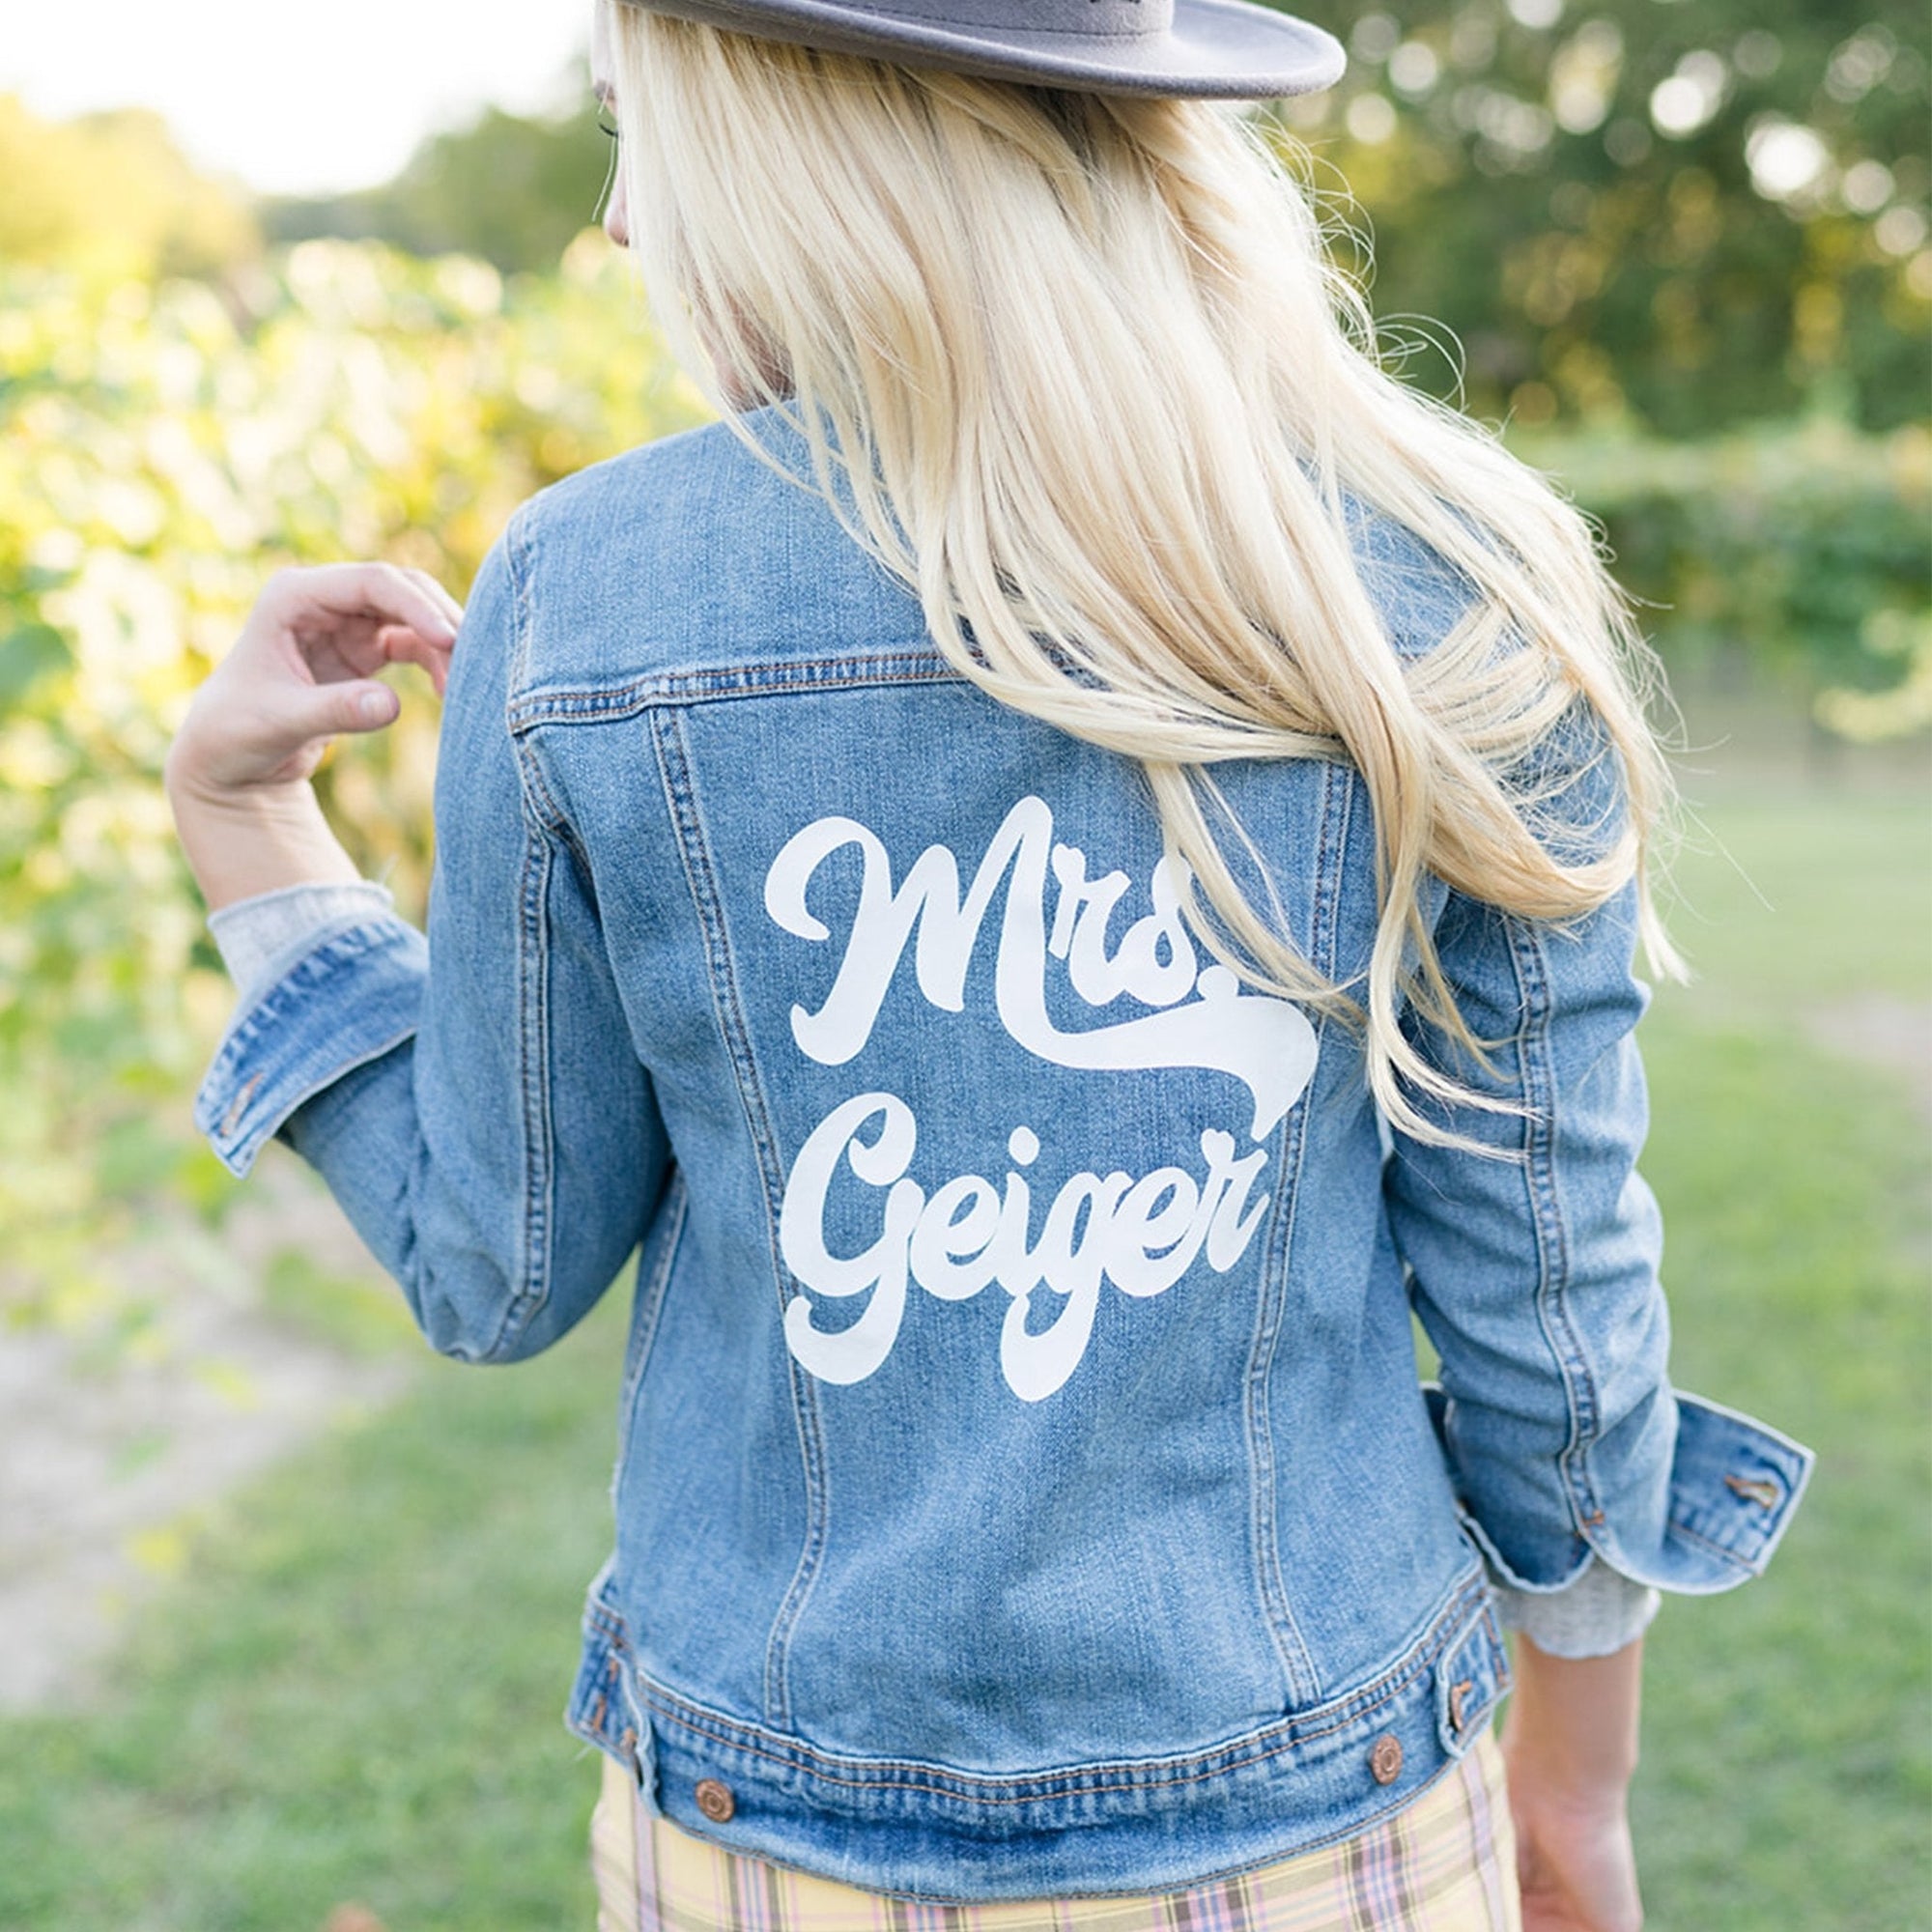 A woman shows off her custom retro denim jacket which reads "Mrs. Goswick" in white text across her shoulders.